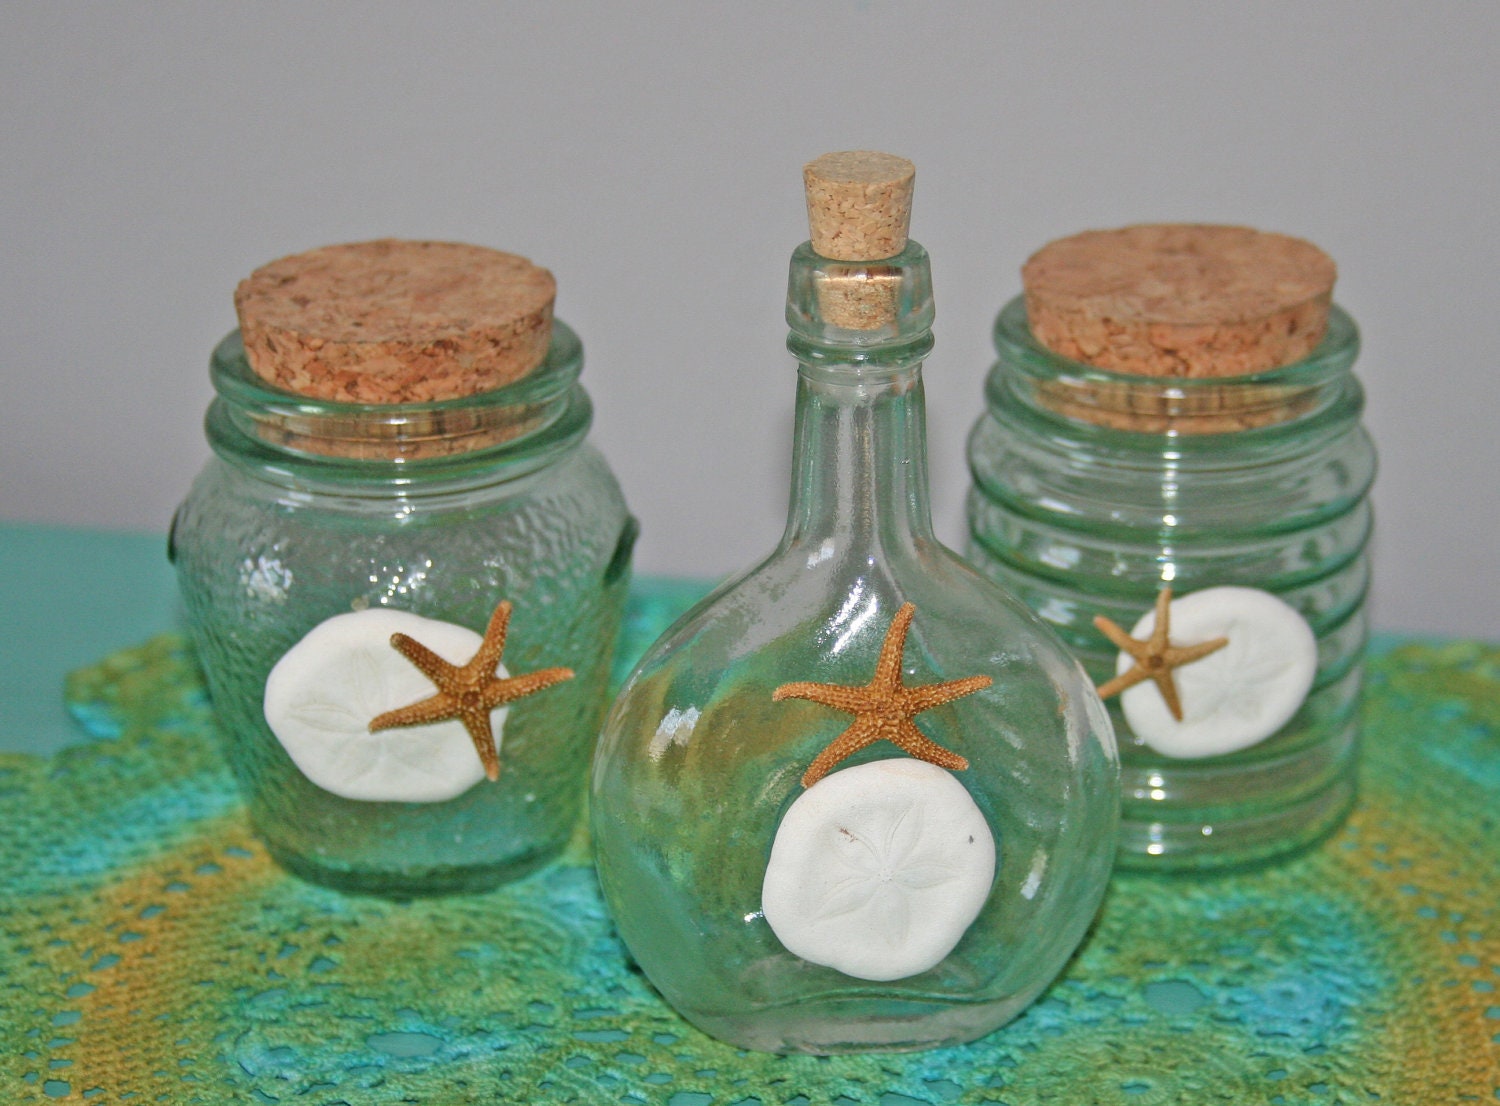 Darling Beach Glass Bottles With Sea Shell Accents